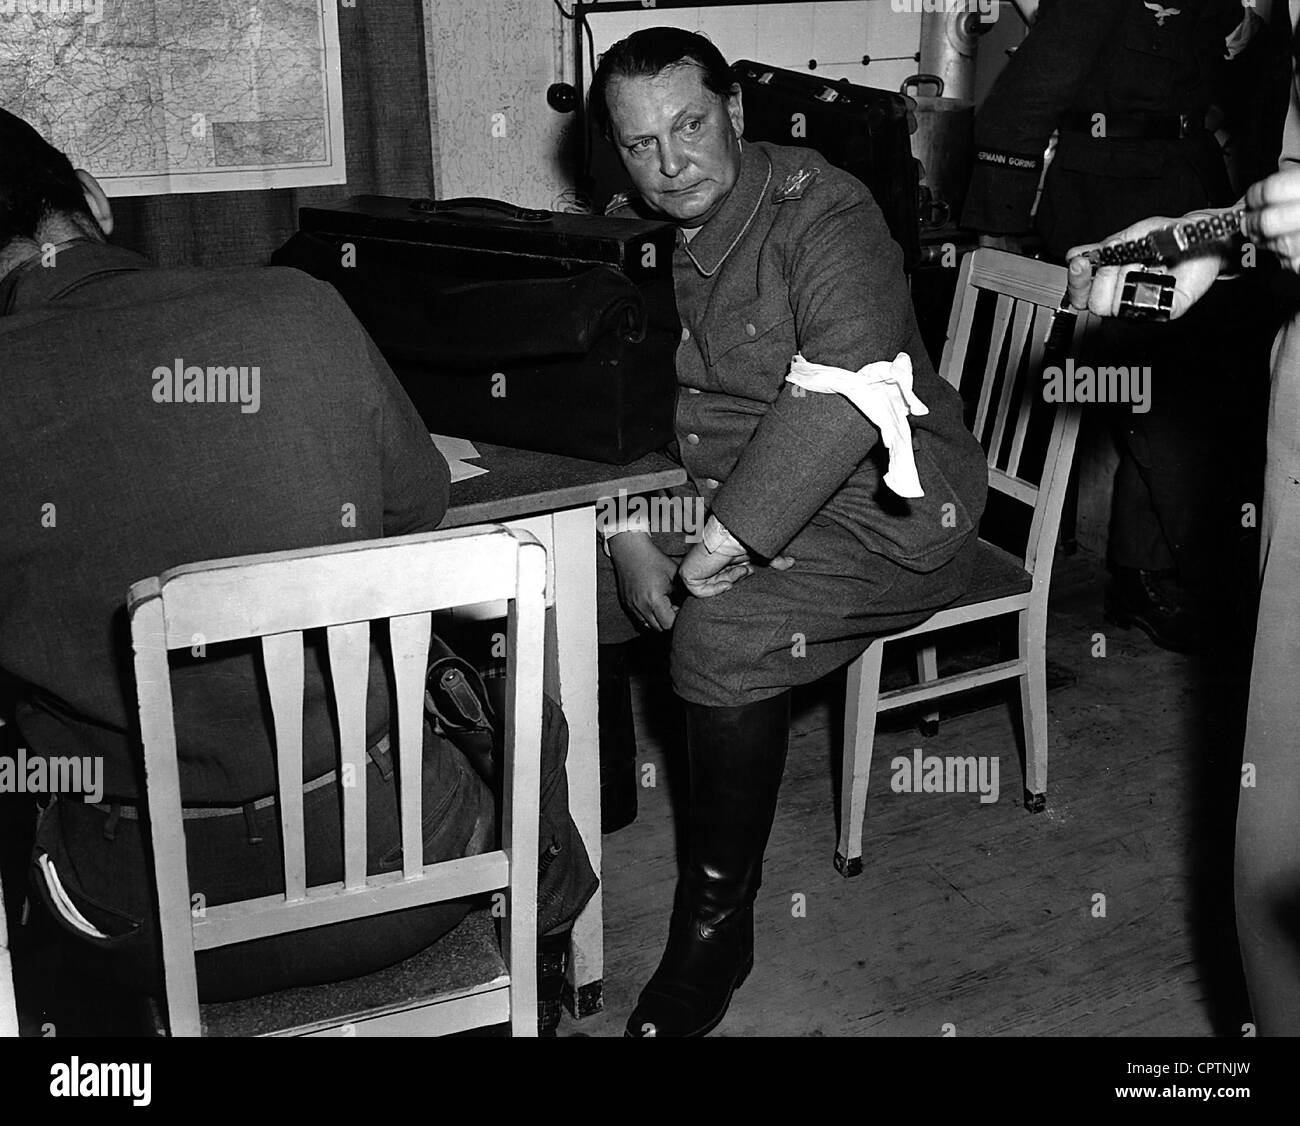 Goering, Hermann, 12.1.1893 - 15.10. 1946, German politician (NSDAP), Reichsmarschall (Reich Marshal), capture, his watch is being inspected, Augsburg, Germany, 9.5.1945, headquarters of the 7th US Army, Stock Photo